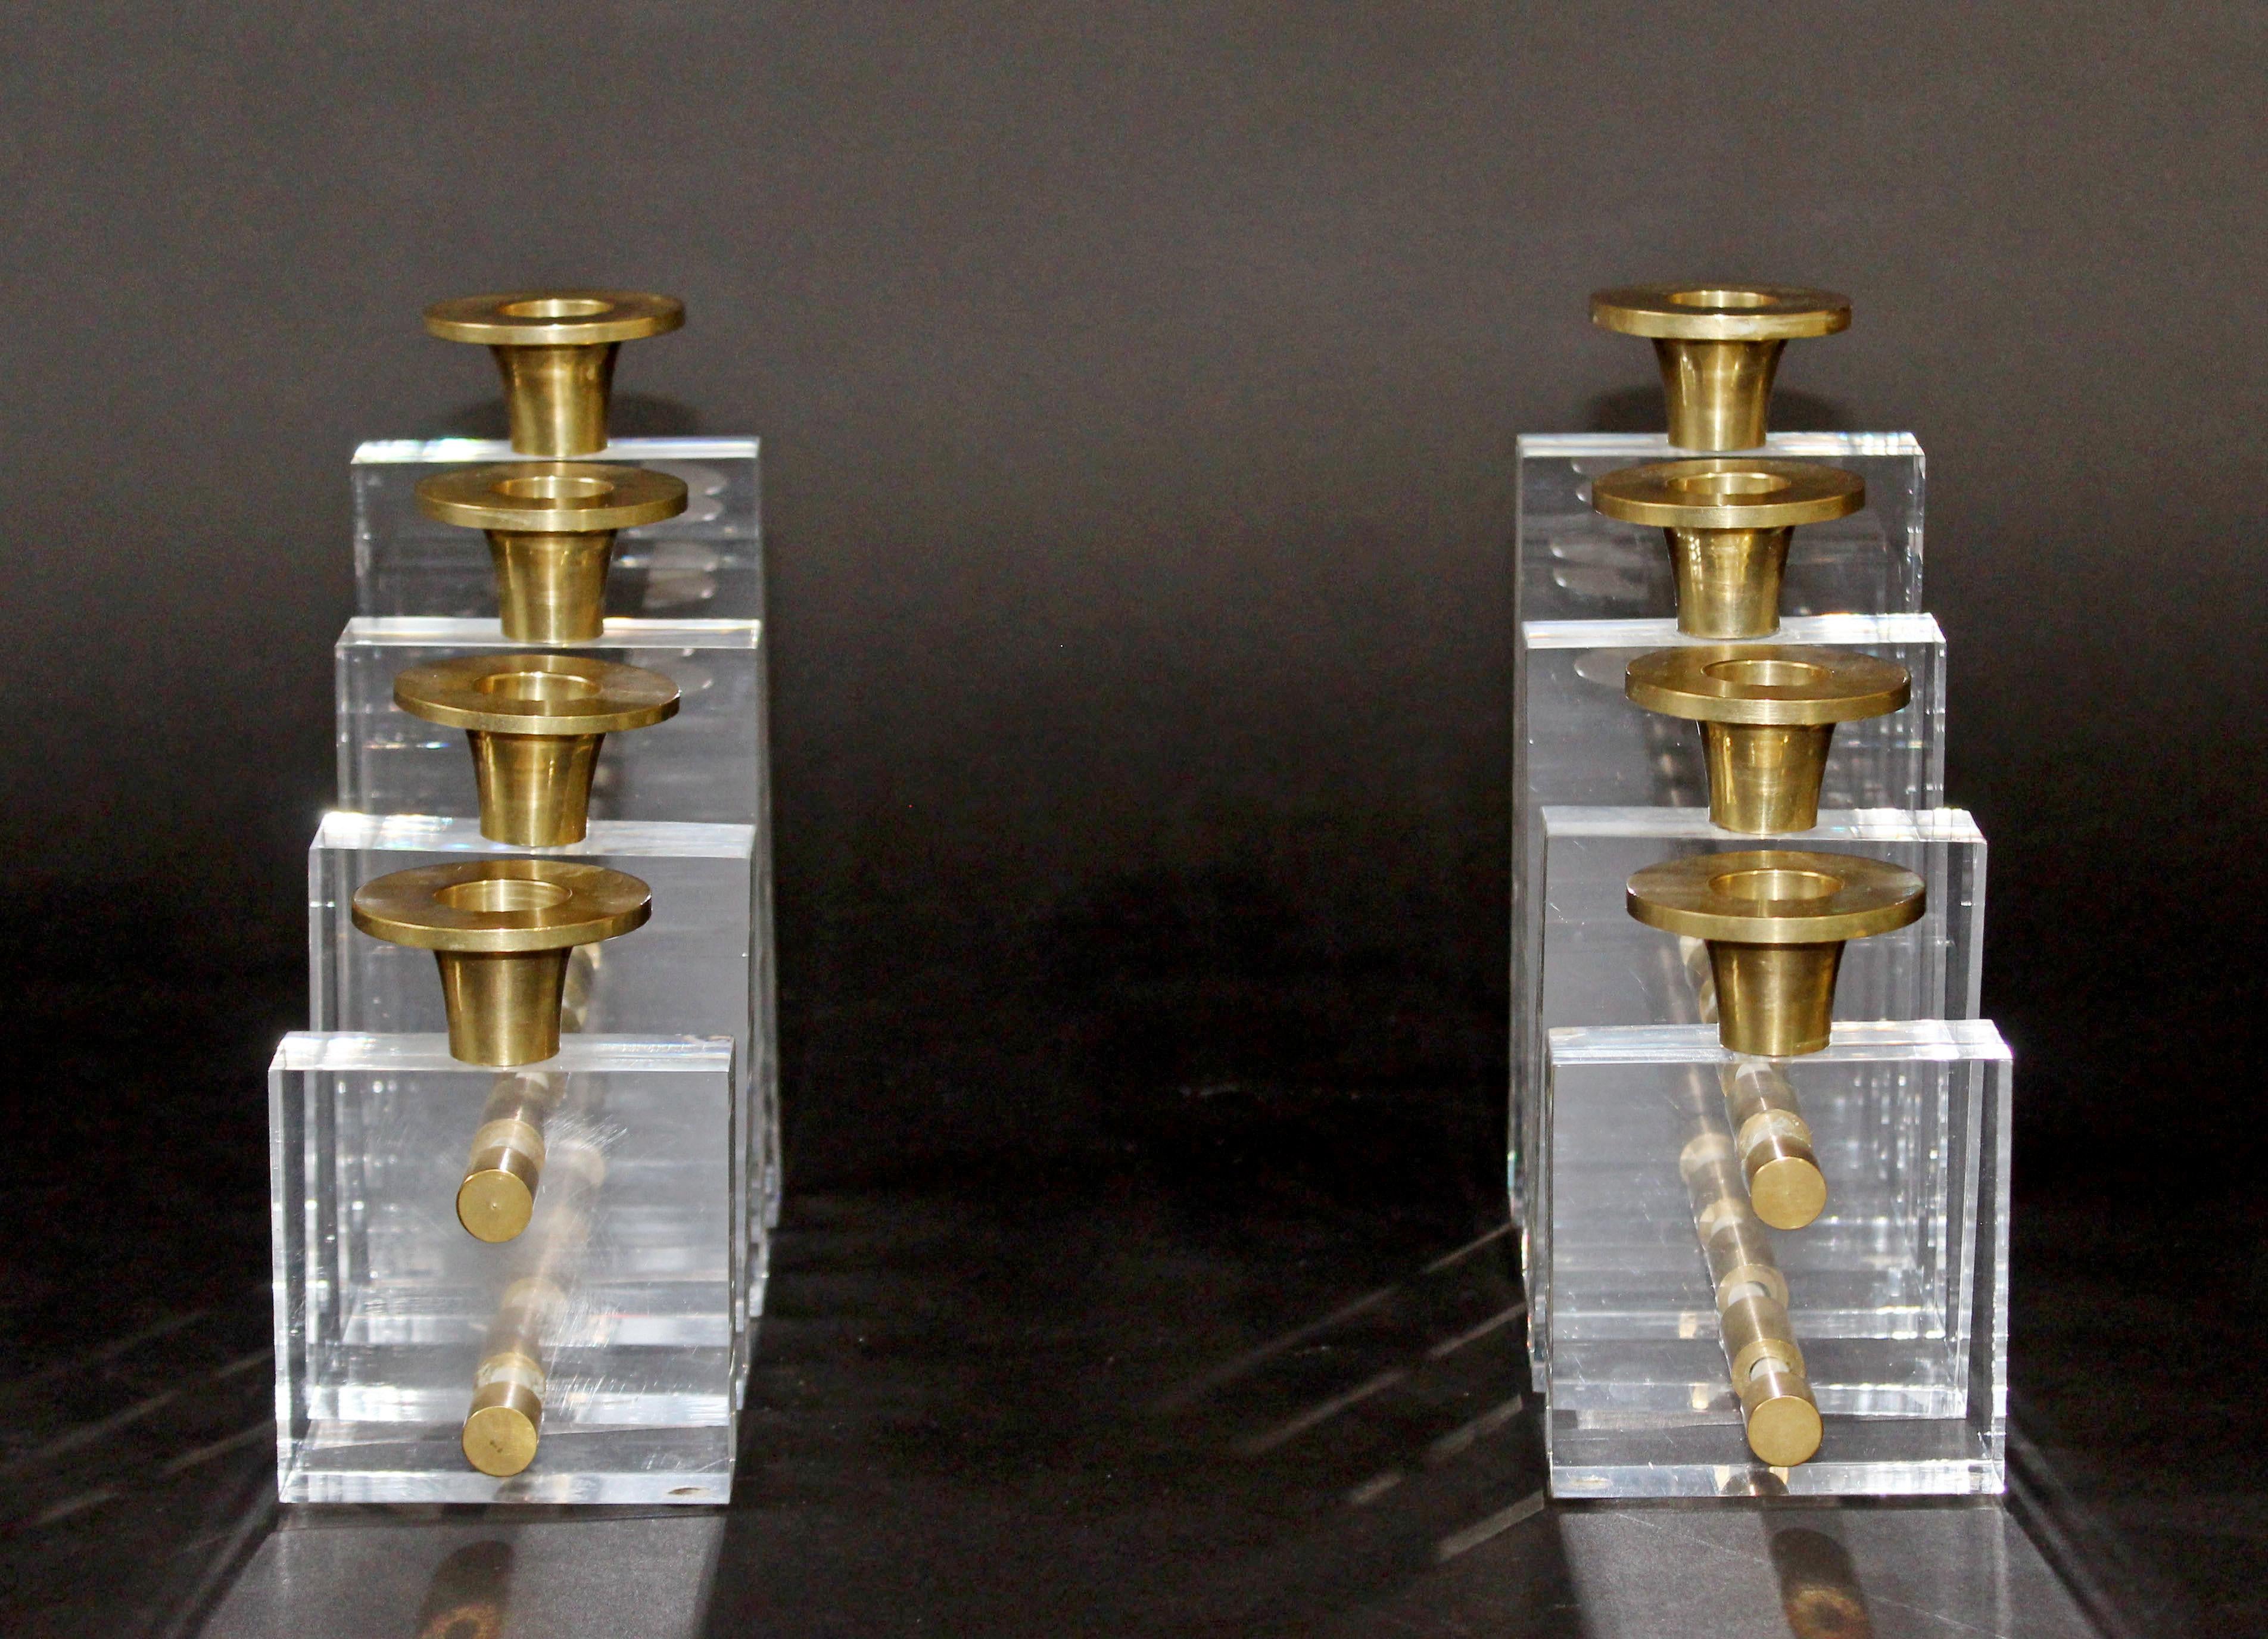 For your consideration is a phenomenal pair of candle holders, made of Lucite and brass by Charles Hollis Jones, circa the 1970s. In excellent condition. The dimensions of each are 3